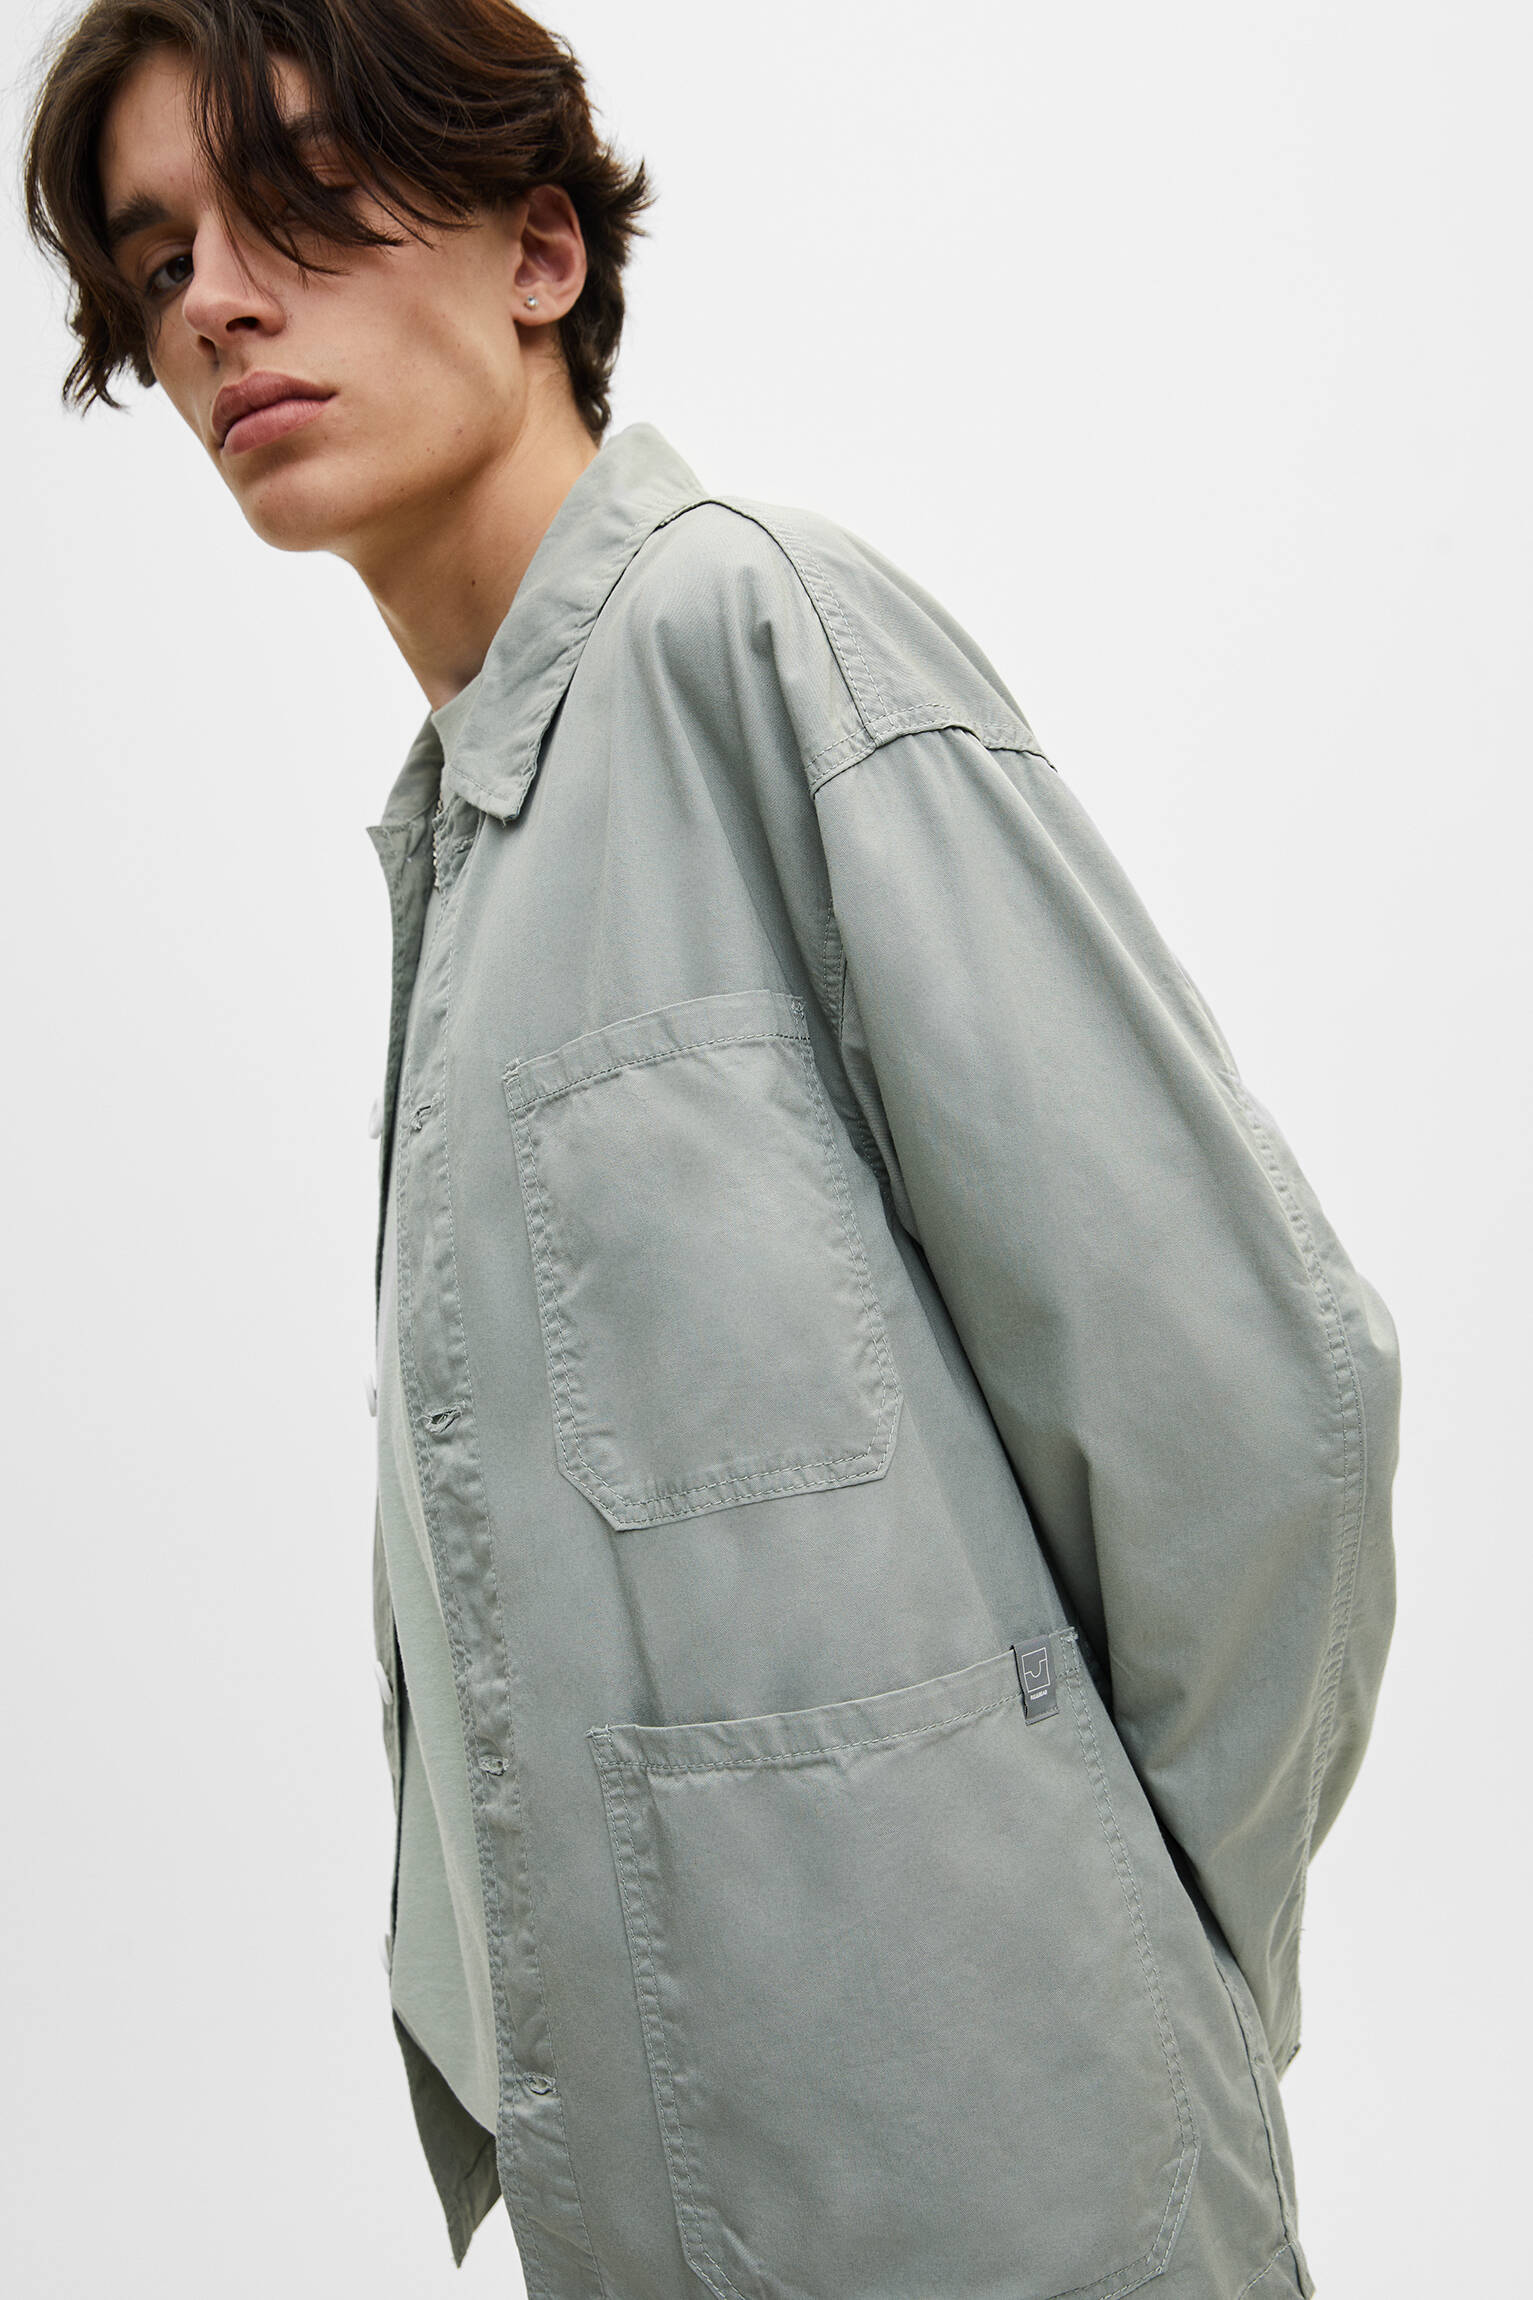 Pull & Bear - Utility jacket with pocket details